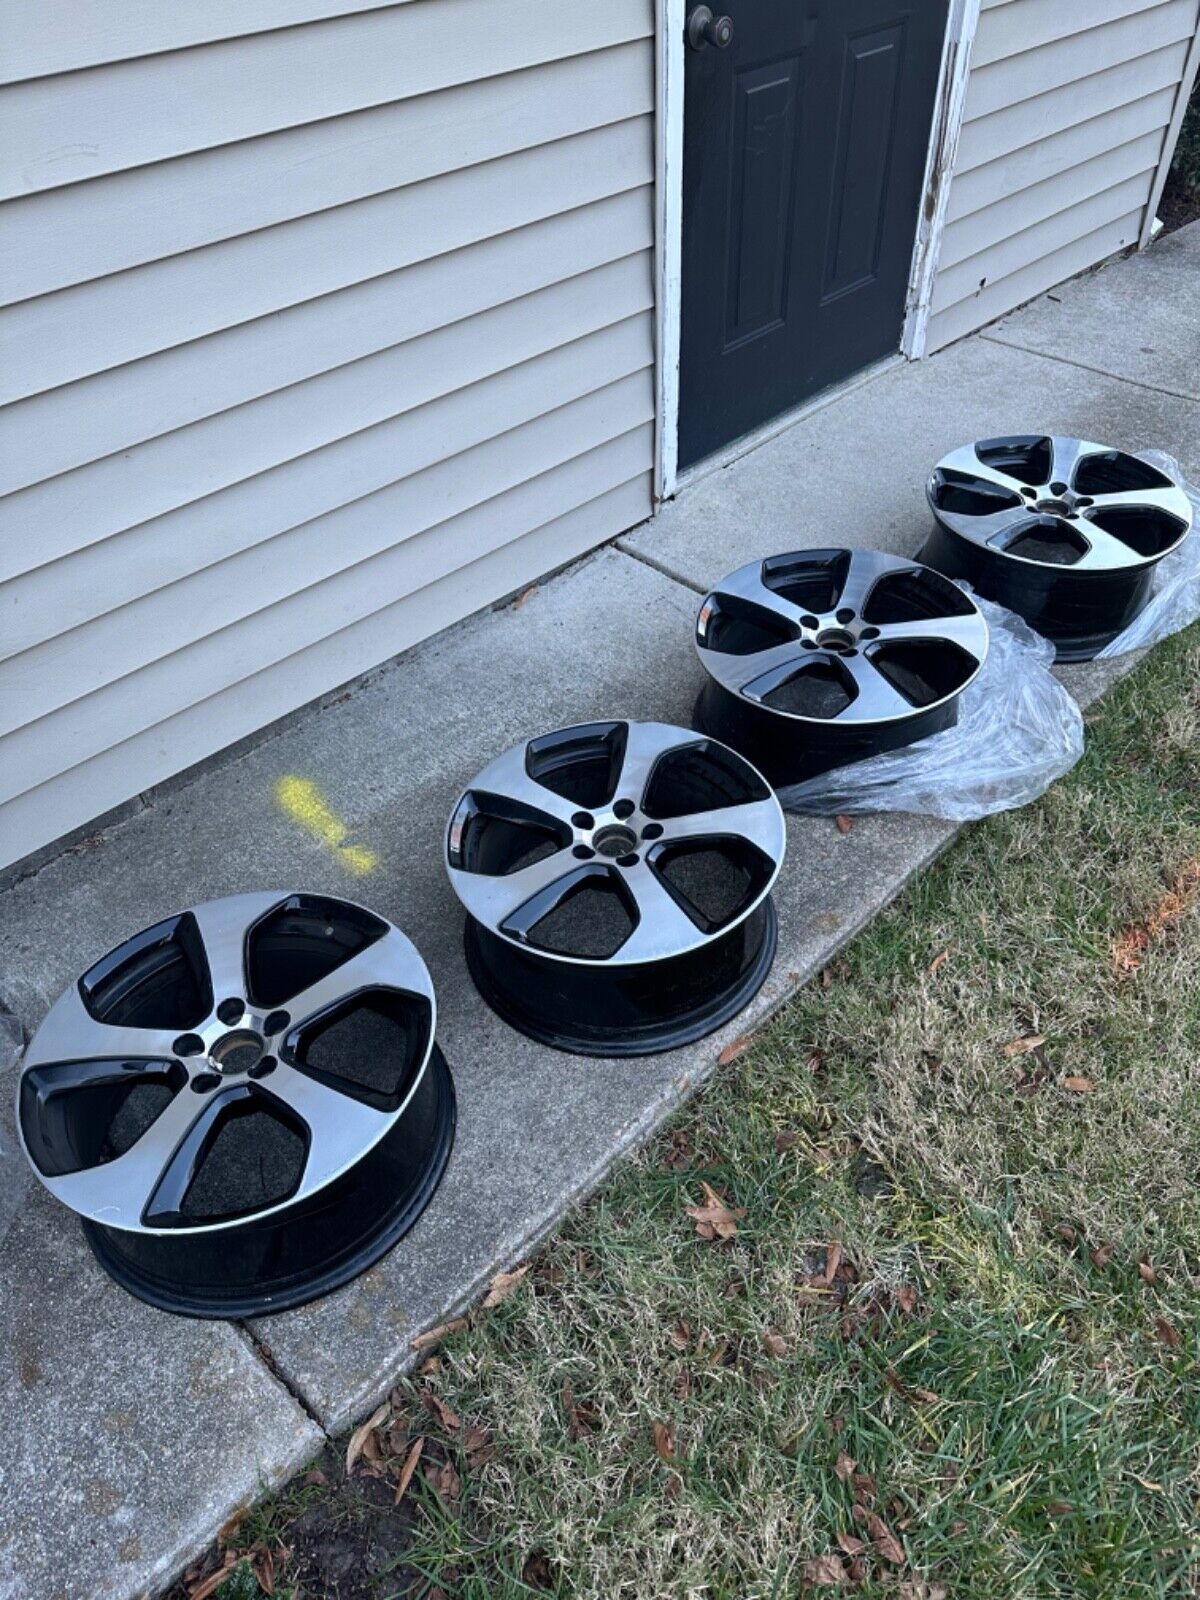 Used Vw Austin wheels and tires off of my 2017 Gti